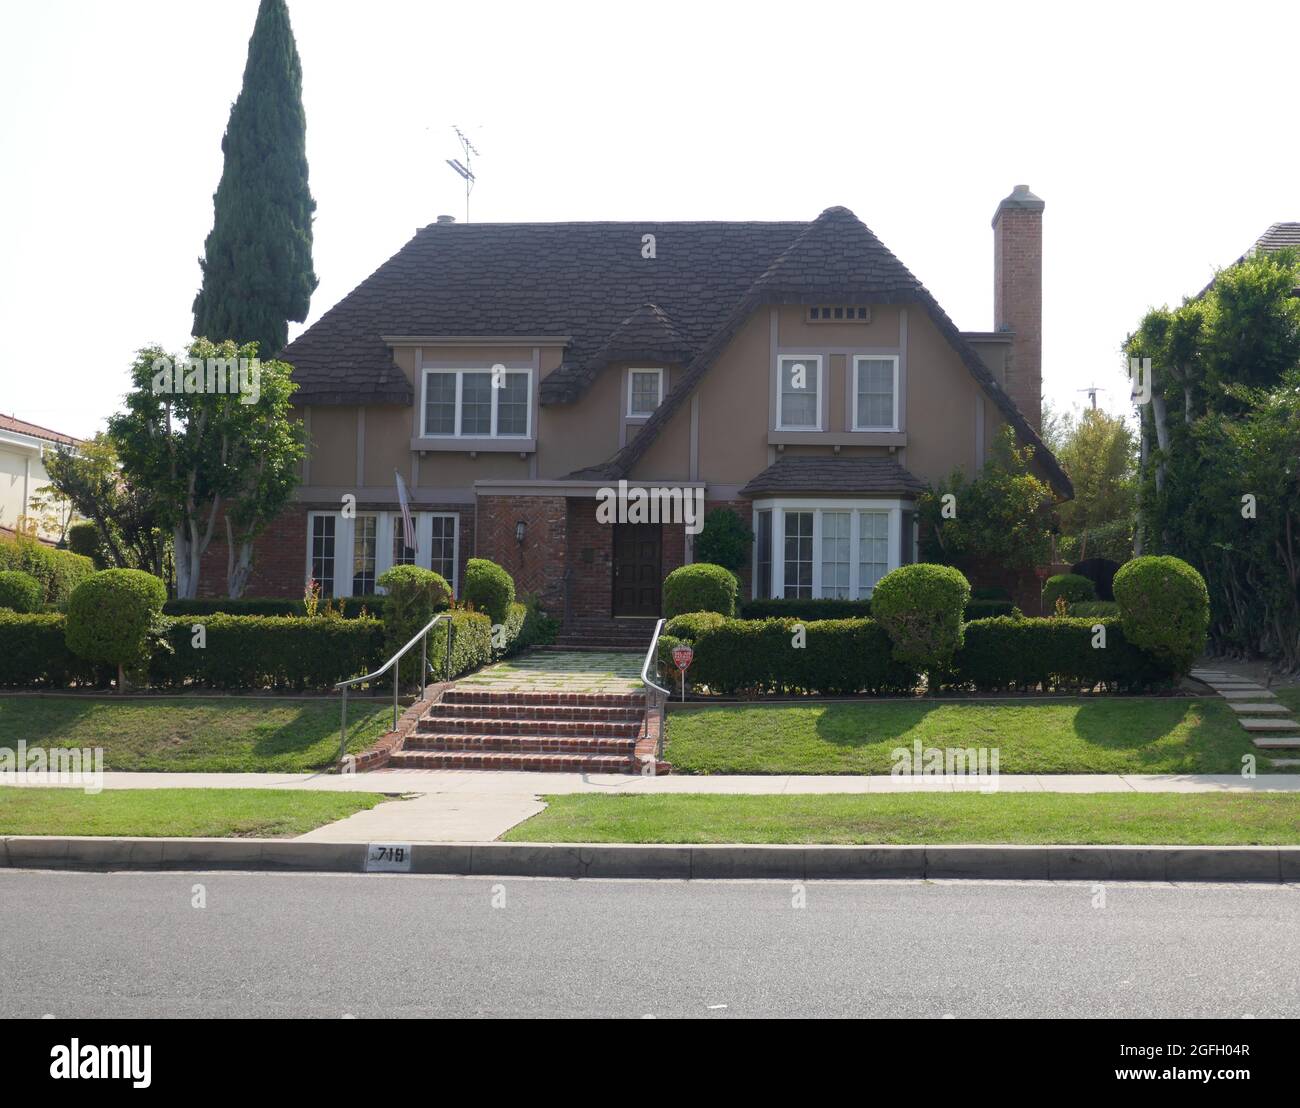 Beverly Hills, California, USA 24th August 2021 A general view of atmosphere of Director Richard Benjamin and Actress Paula Prentiss, Actor Arnold Lee, Actor Rod La Rocque and Actress Vilma Banky's Former Home/house on August 24, 2021 in Beverly Hills, California, USA. Photo by Barry King/Alamy Stock Photo Stock Photo